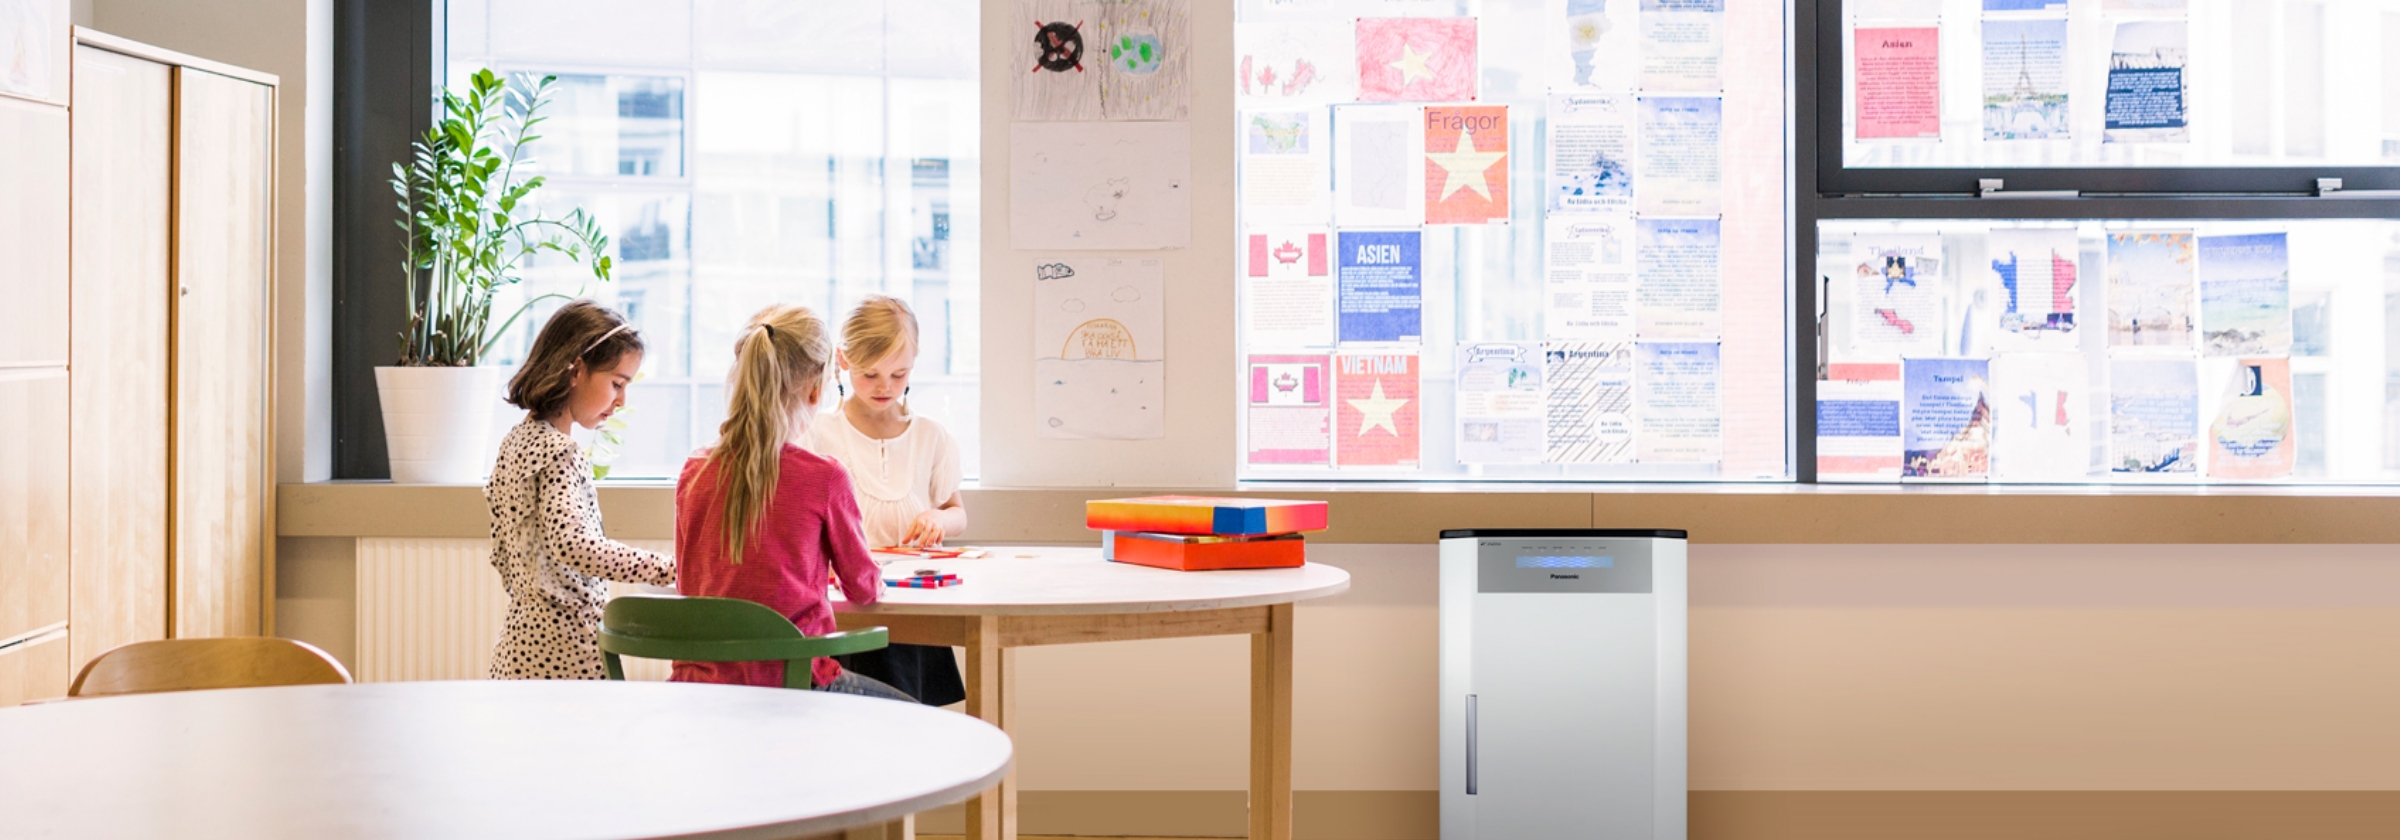 ziaino® installed in the classroom with children: image of case study